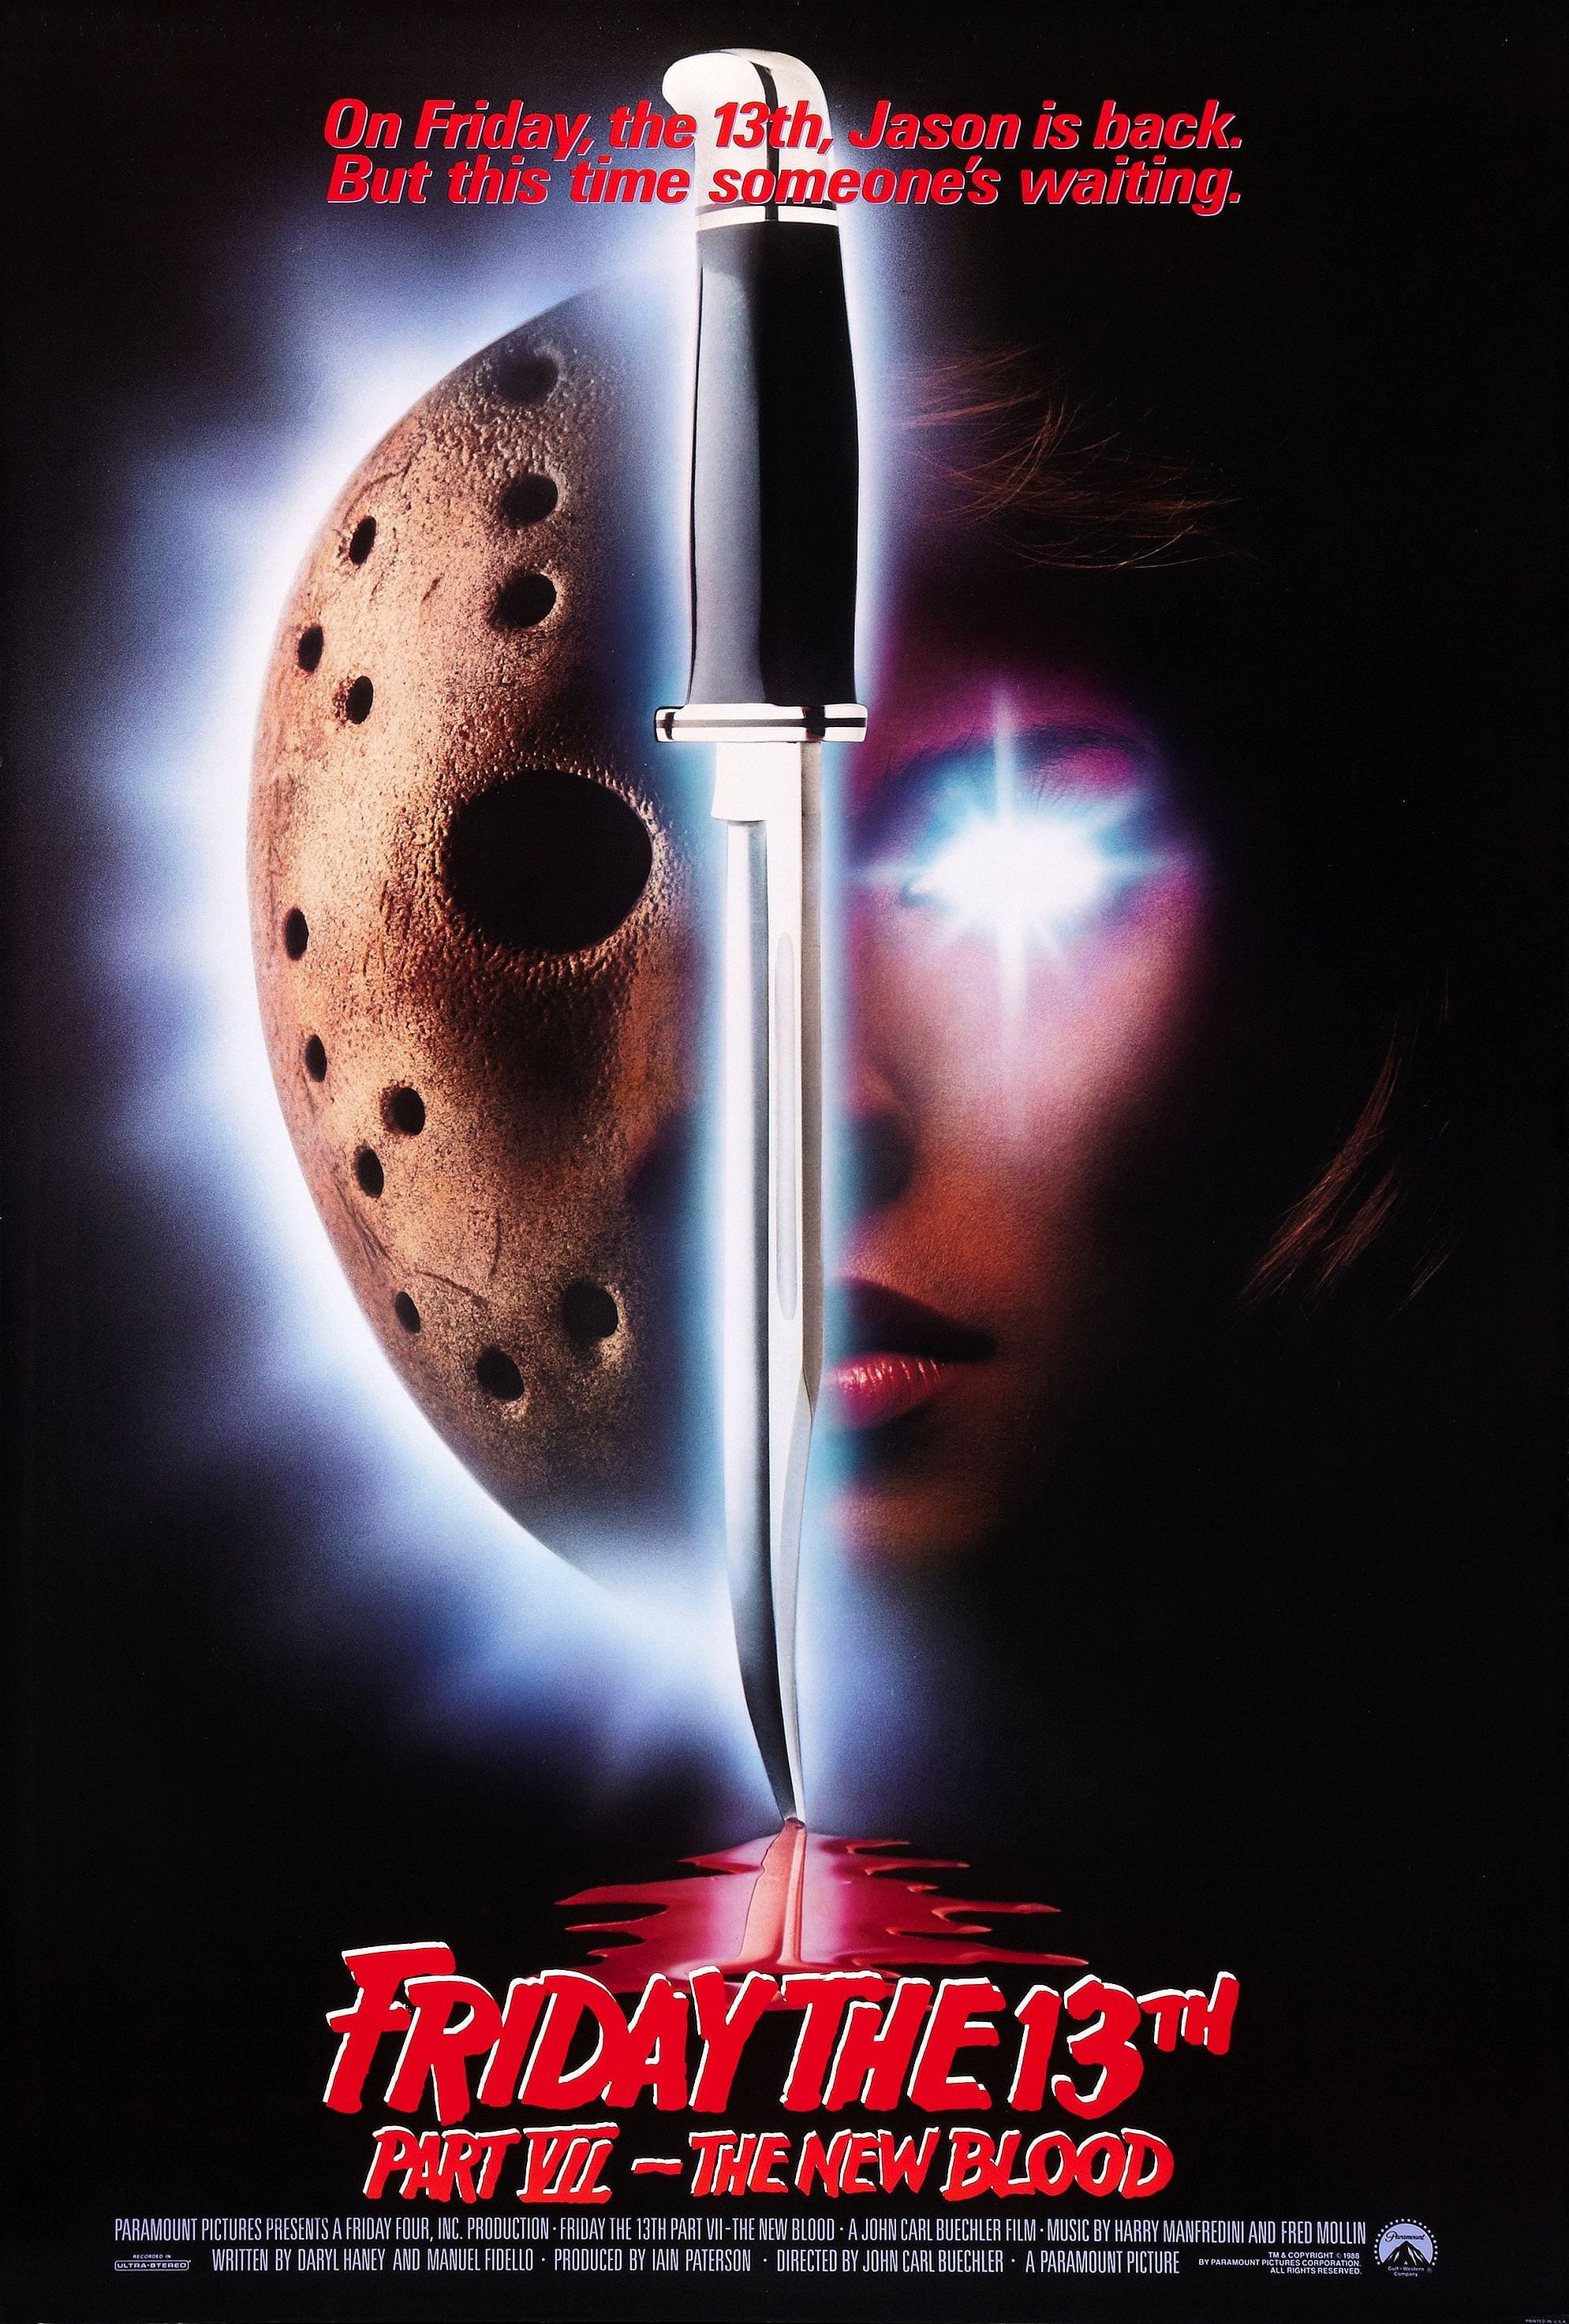 3840x2160 resolution Friday the 13th movie poster, movies, Jason